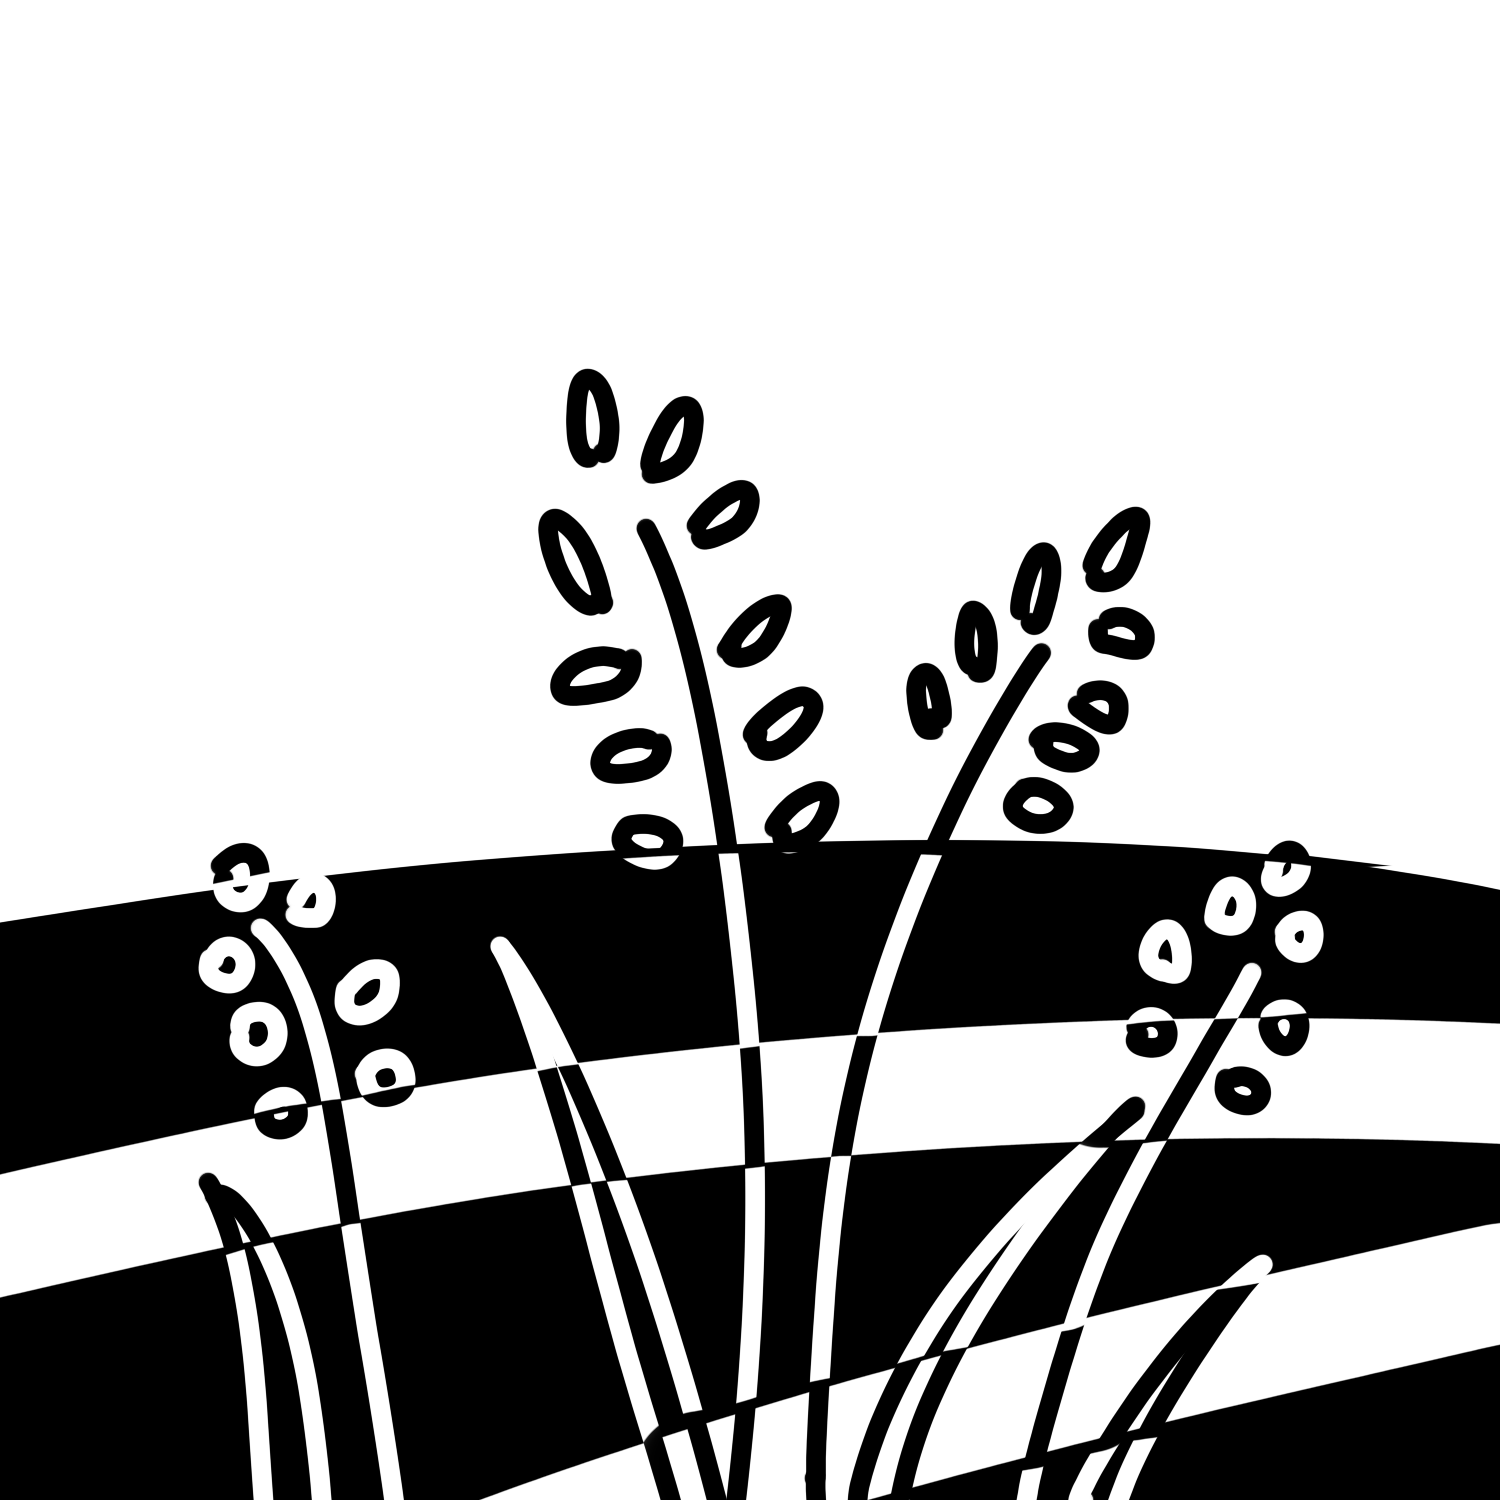 In black and white. A stylistic illustration of rice plants.